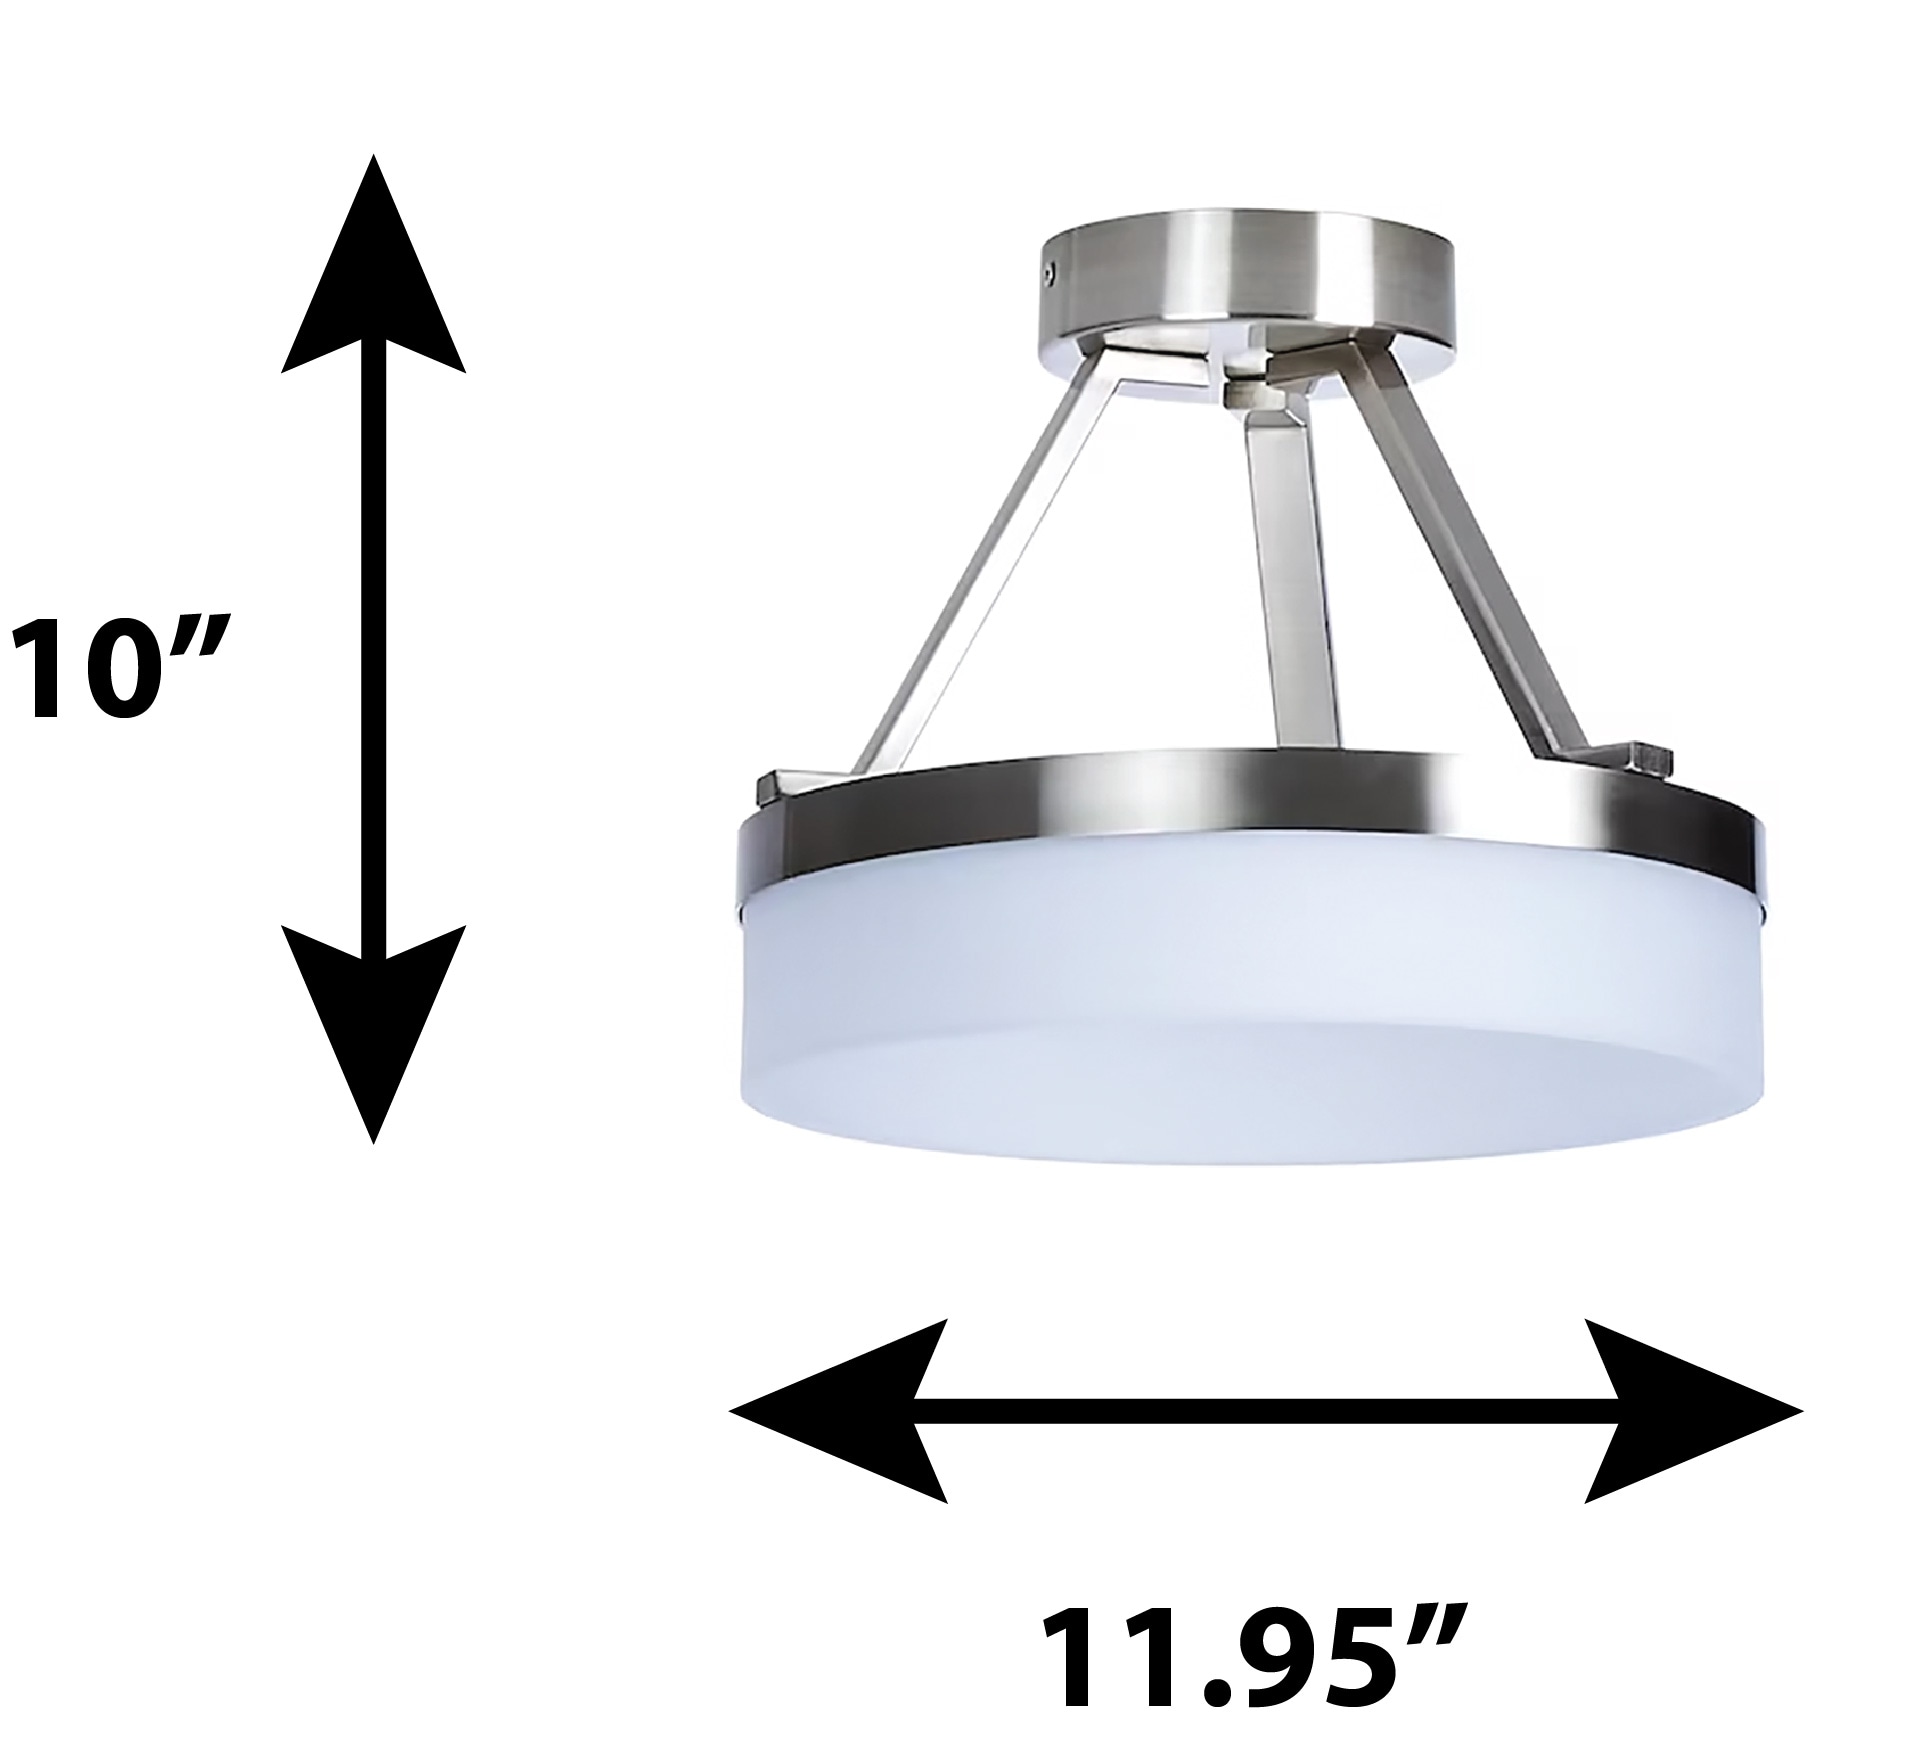 Semi-Flush Mount Ceiling Light - Integrated LED - 10-in x 11.95-in -  Acrylic - Brushed Nickel